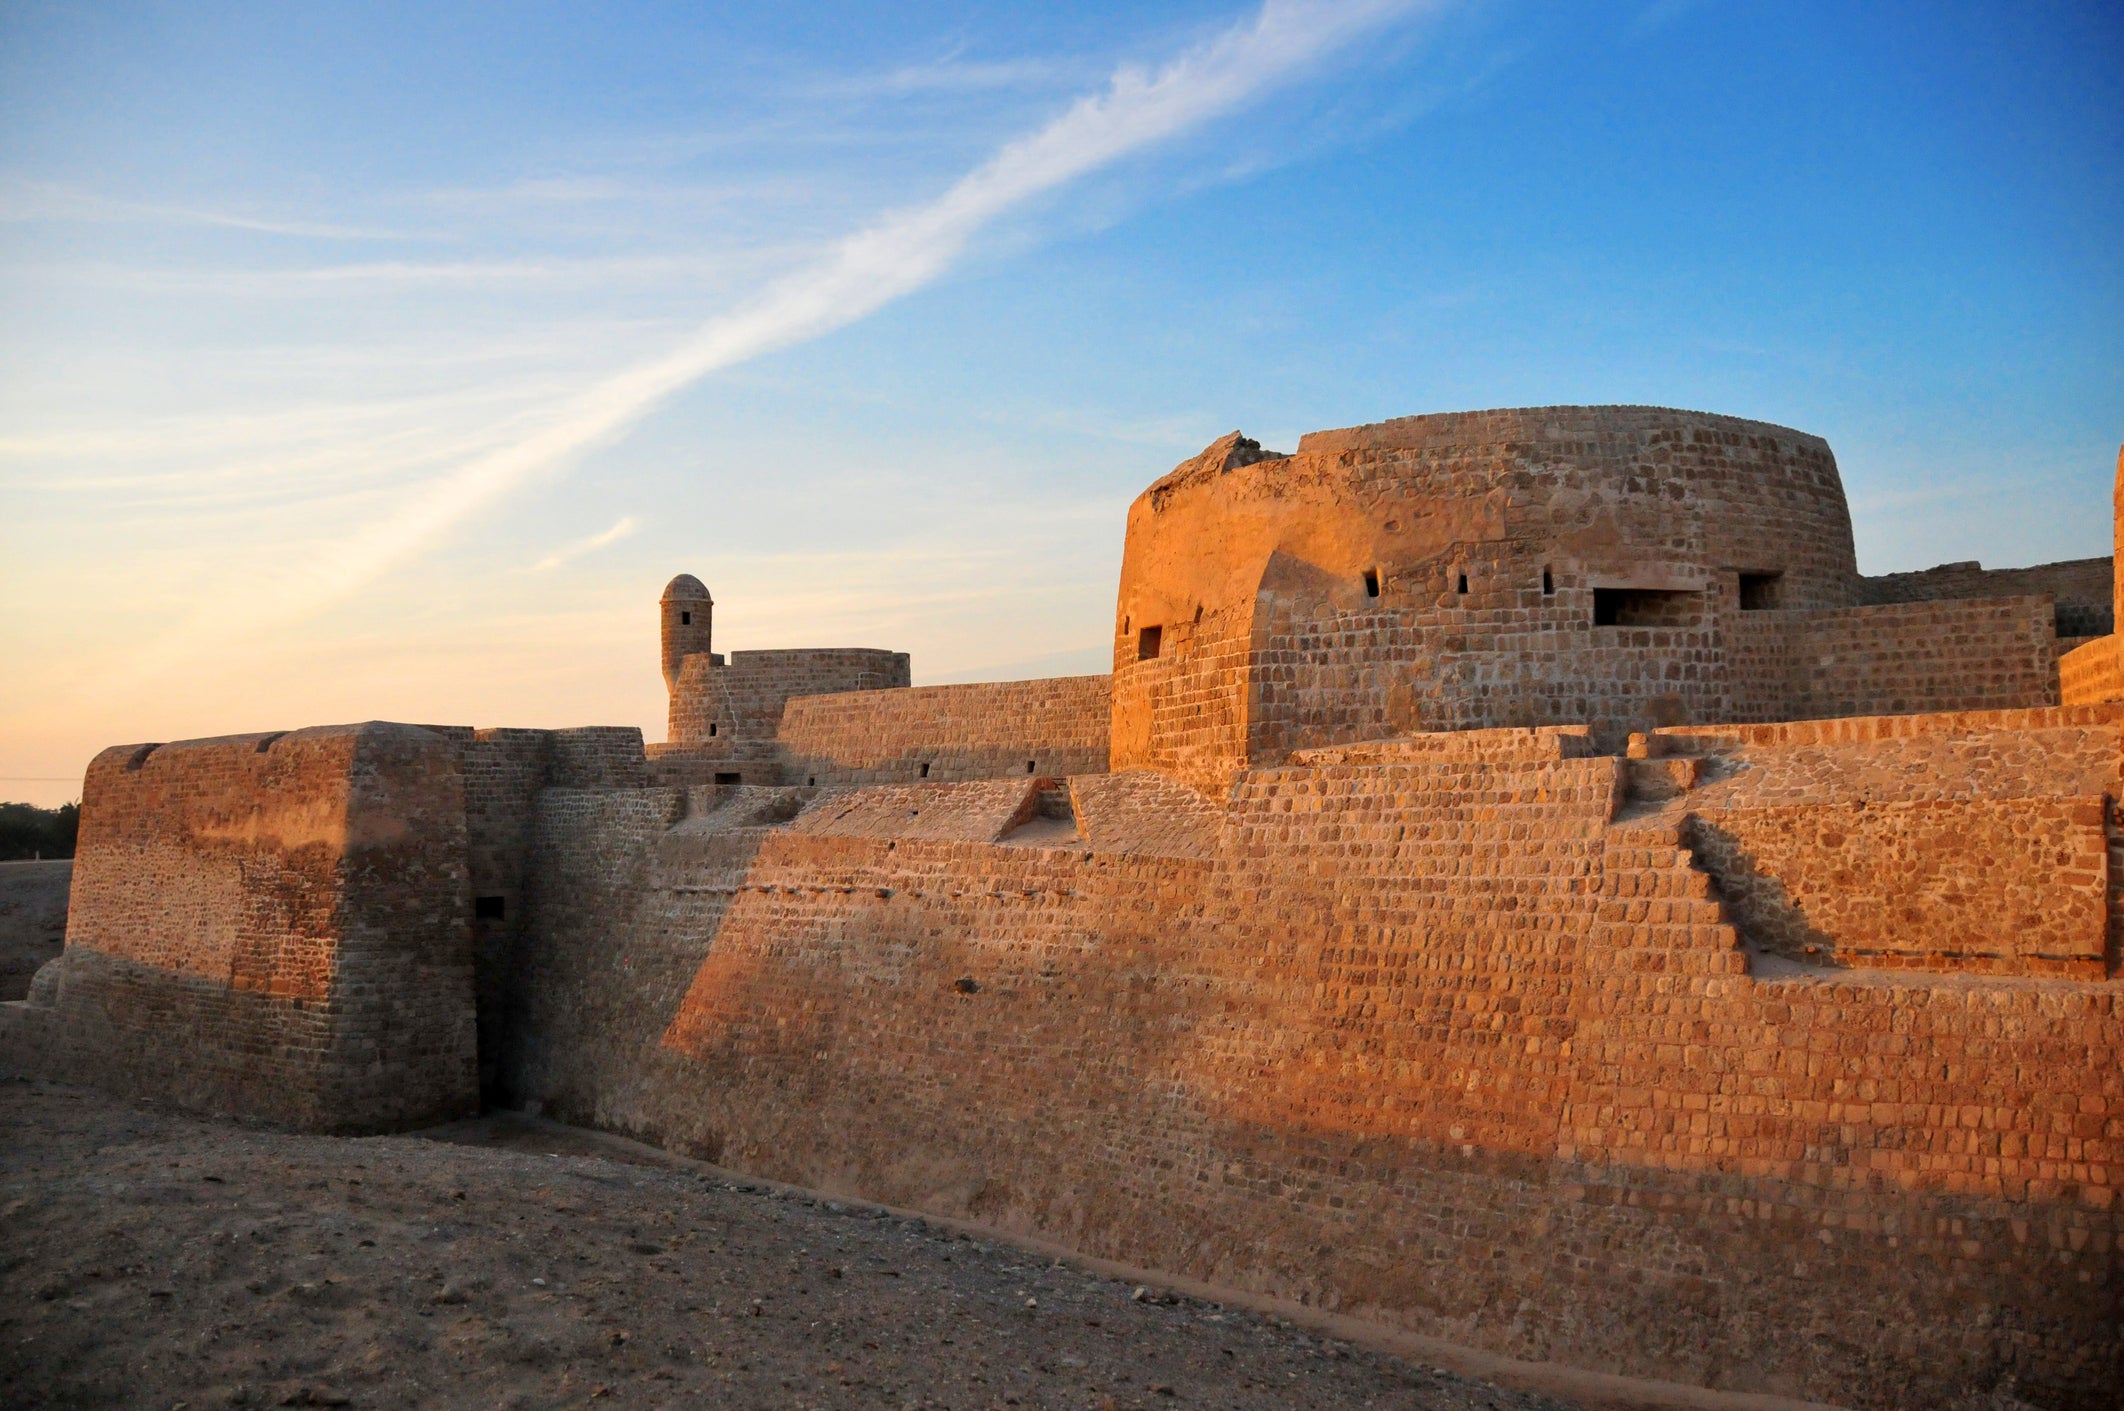 Qal’at al-Bahrain helps tell the story of which civilisations lived in the region